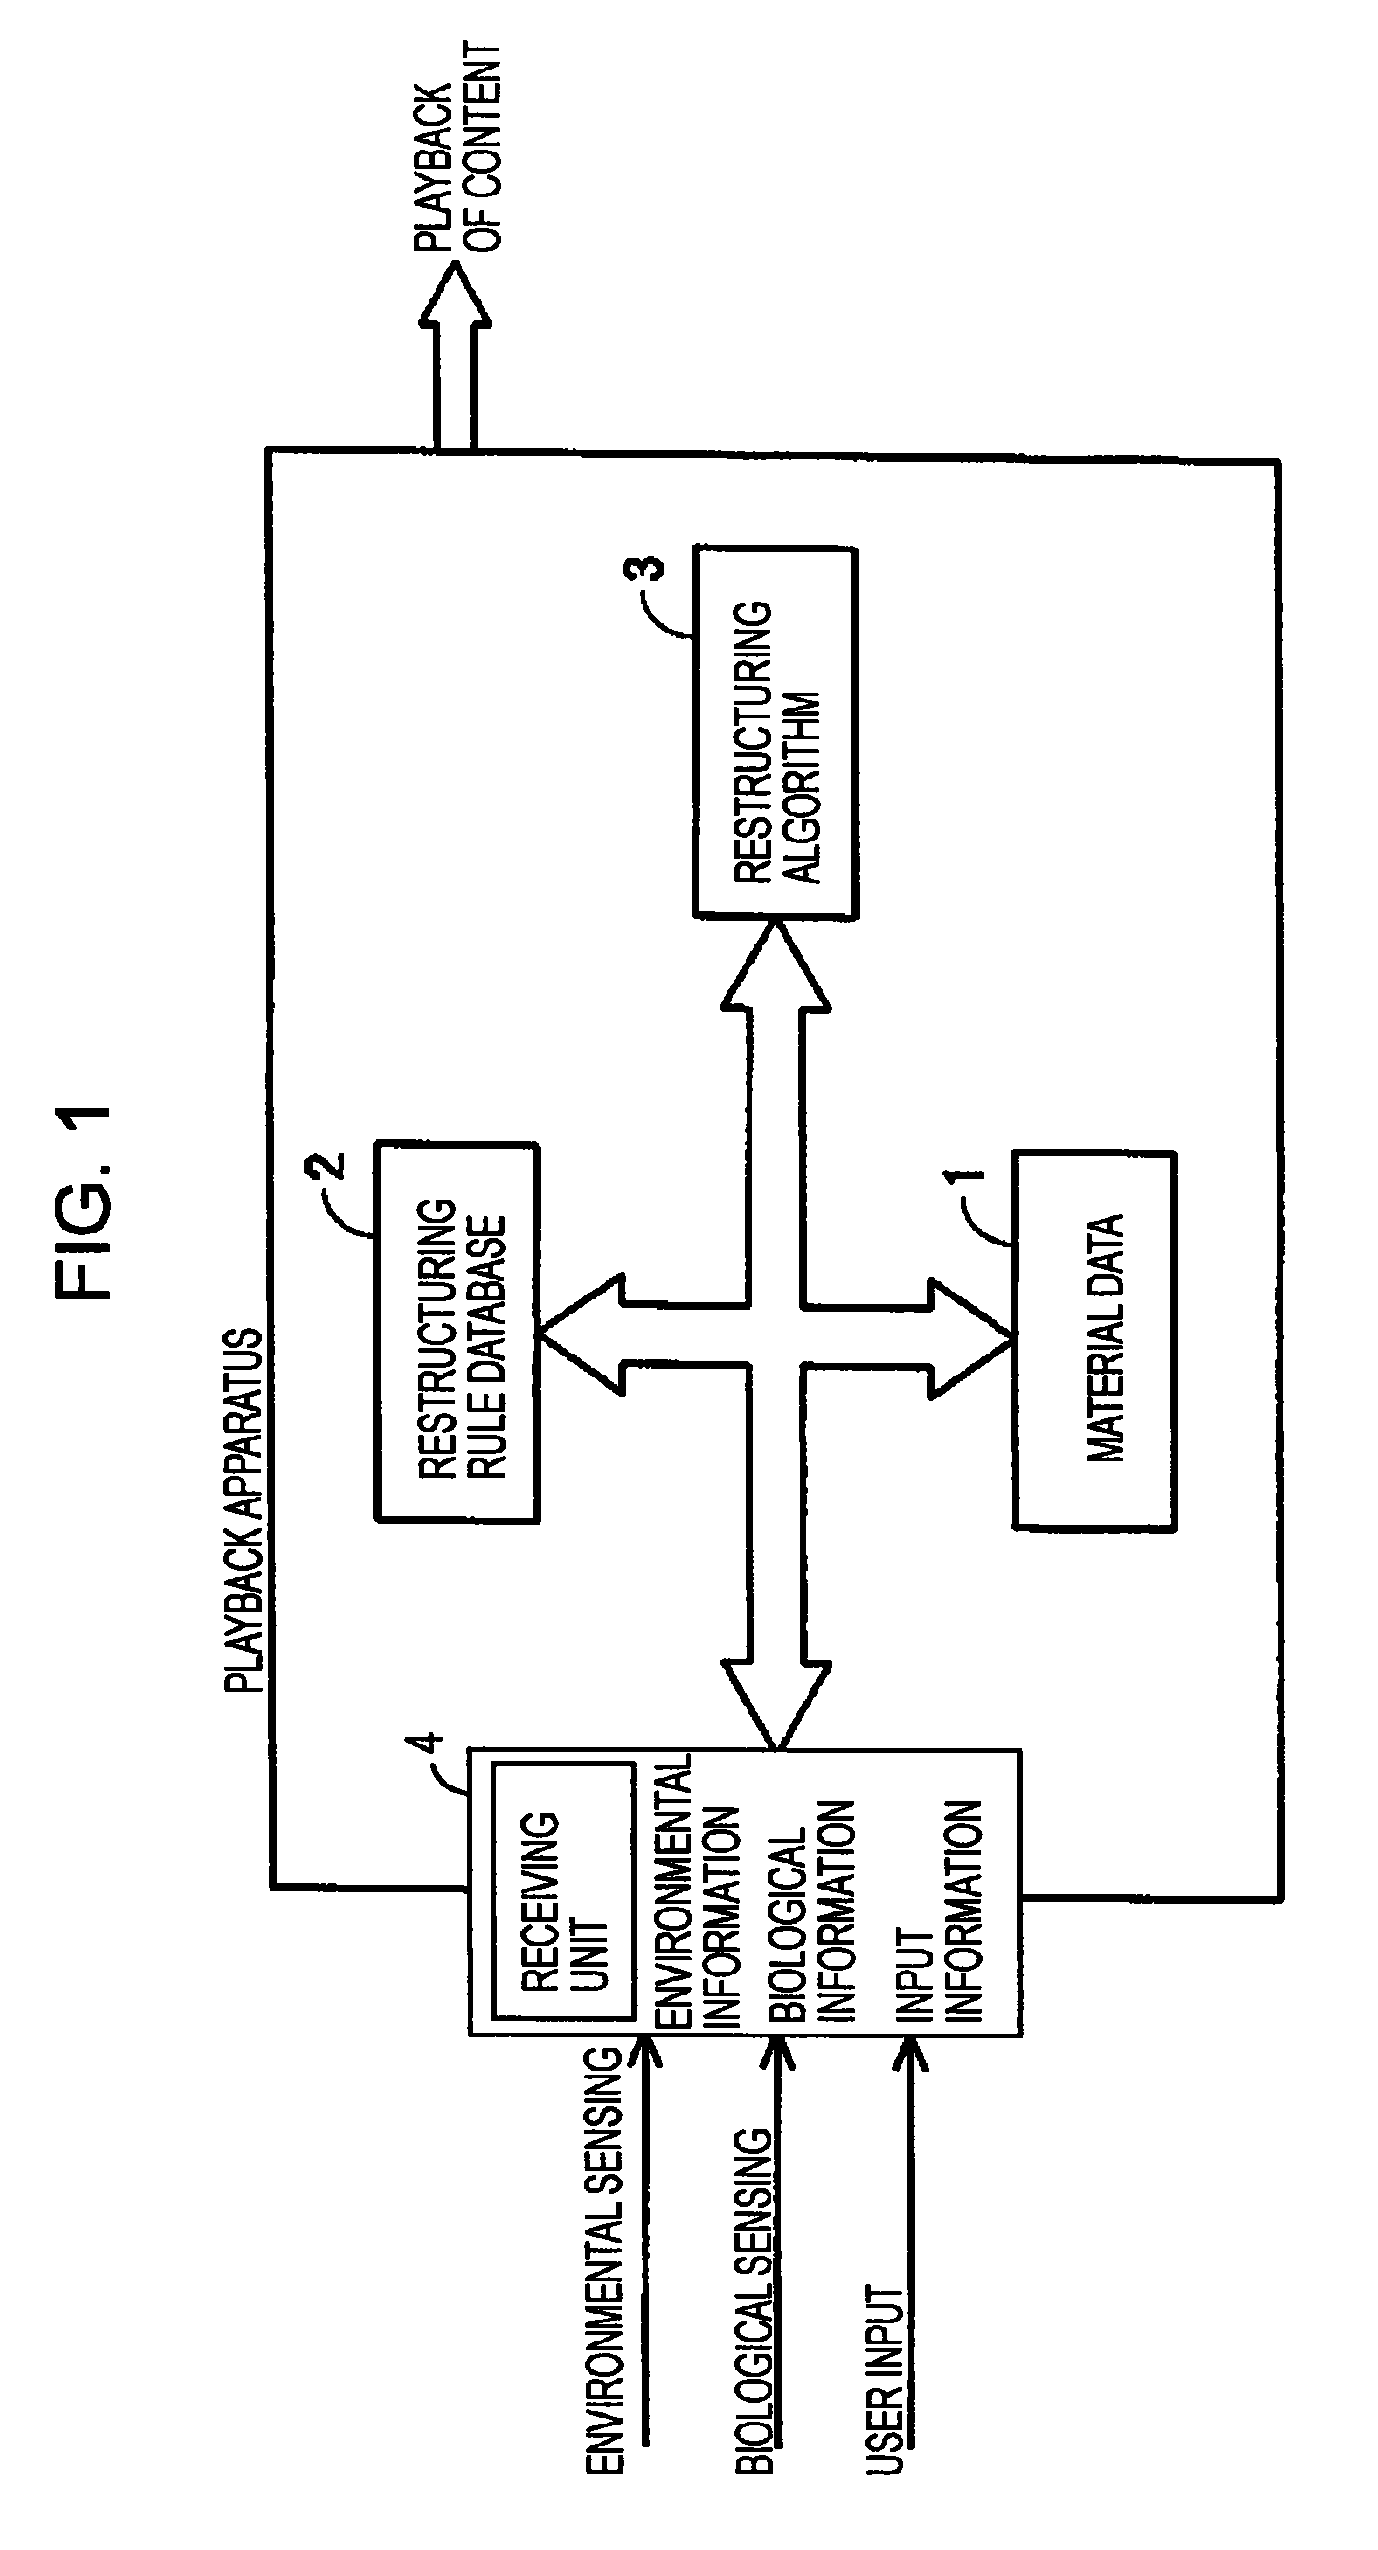 Apparatus and method of creating content